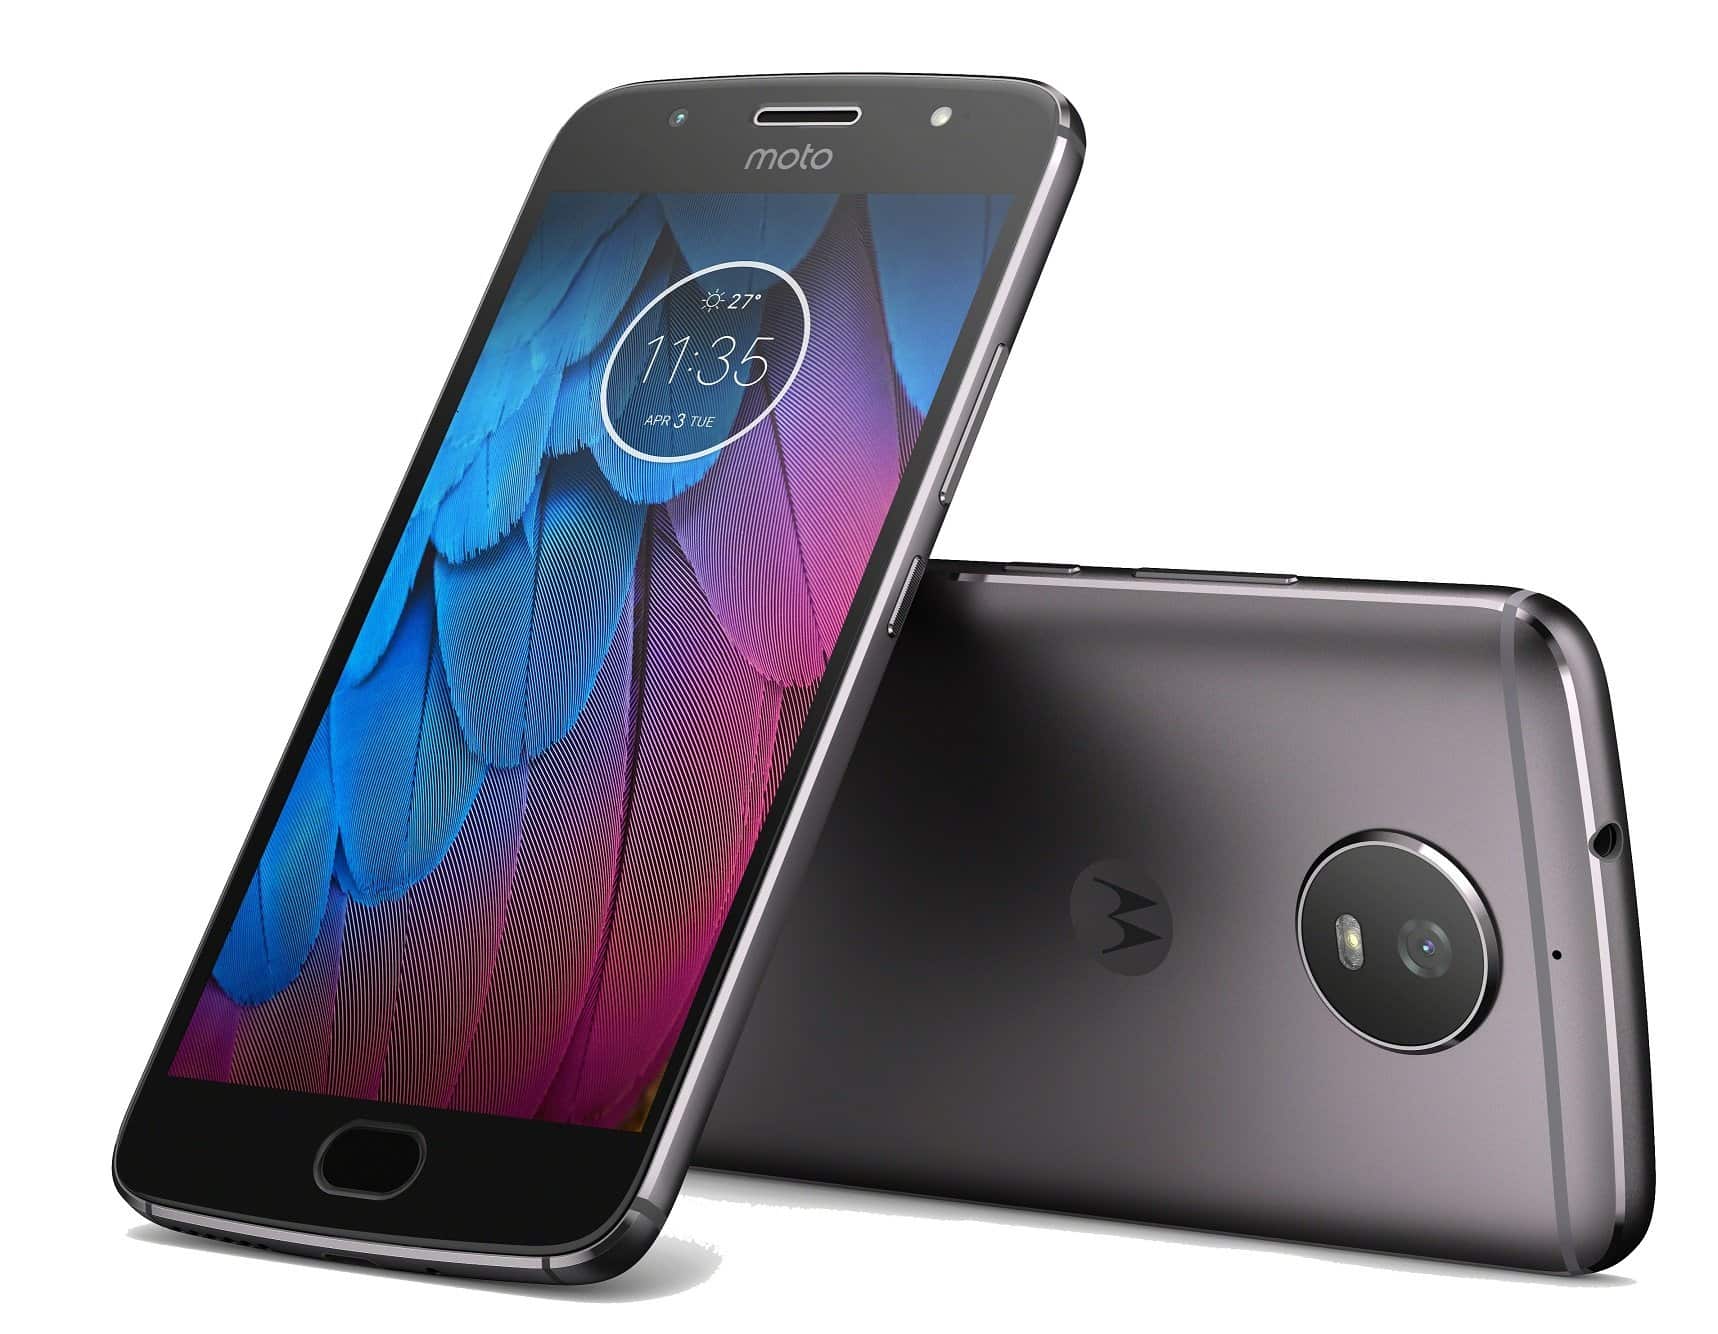 Moto G5S and Moto G5S Plus announced; G5S Plus features dual rear